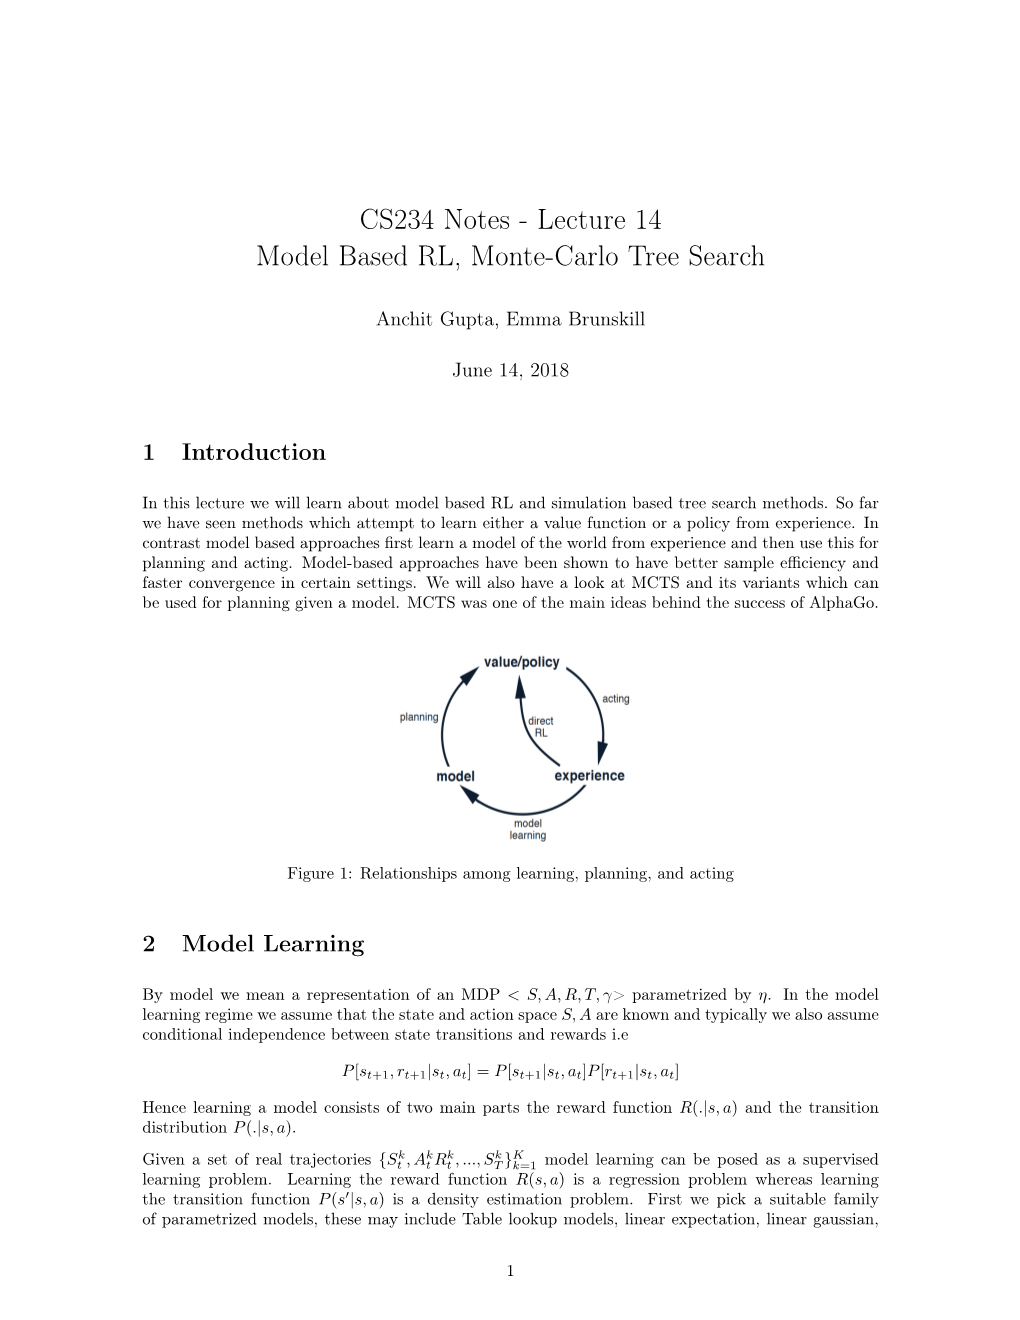 CS234 Notes - Lecture 14 Model Based RL, Monte-Carlo Tree Search